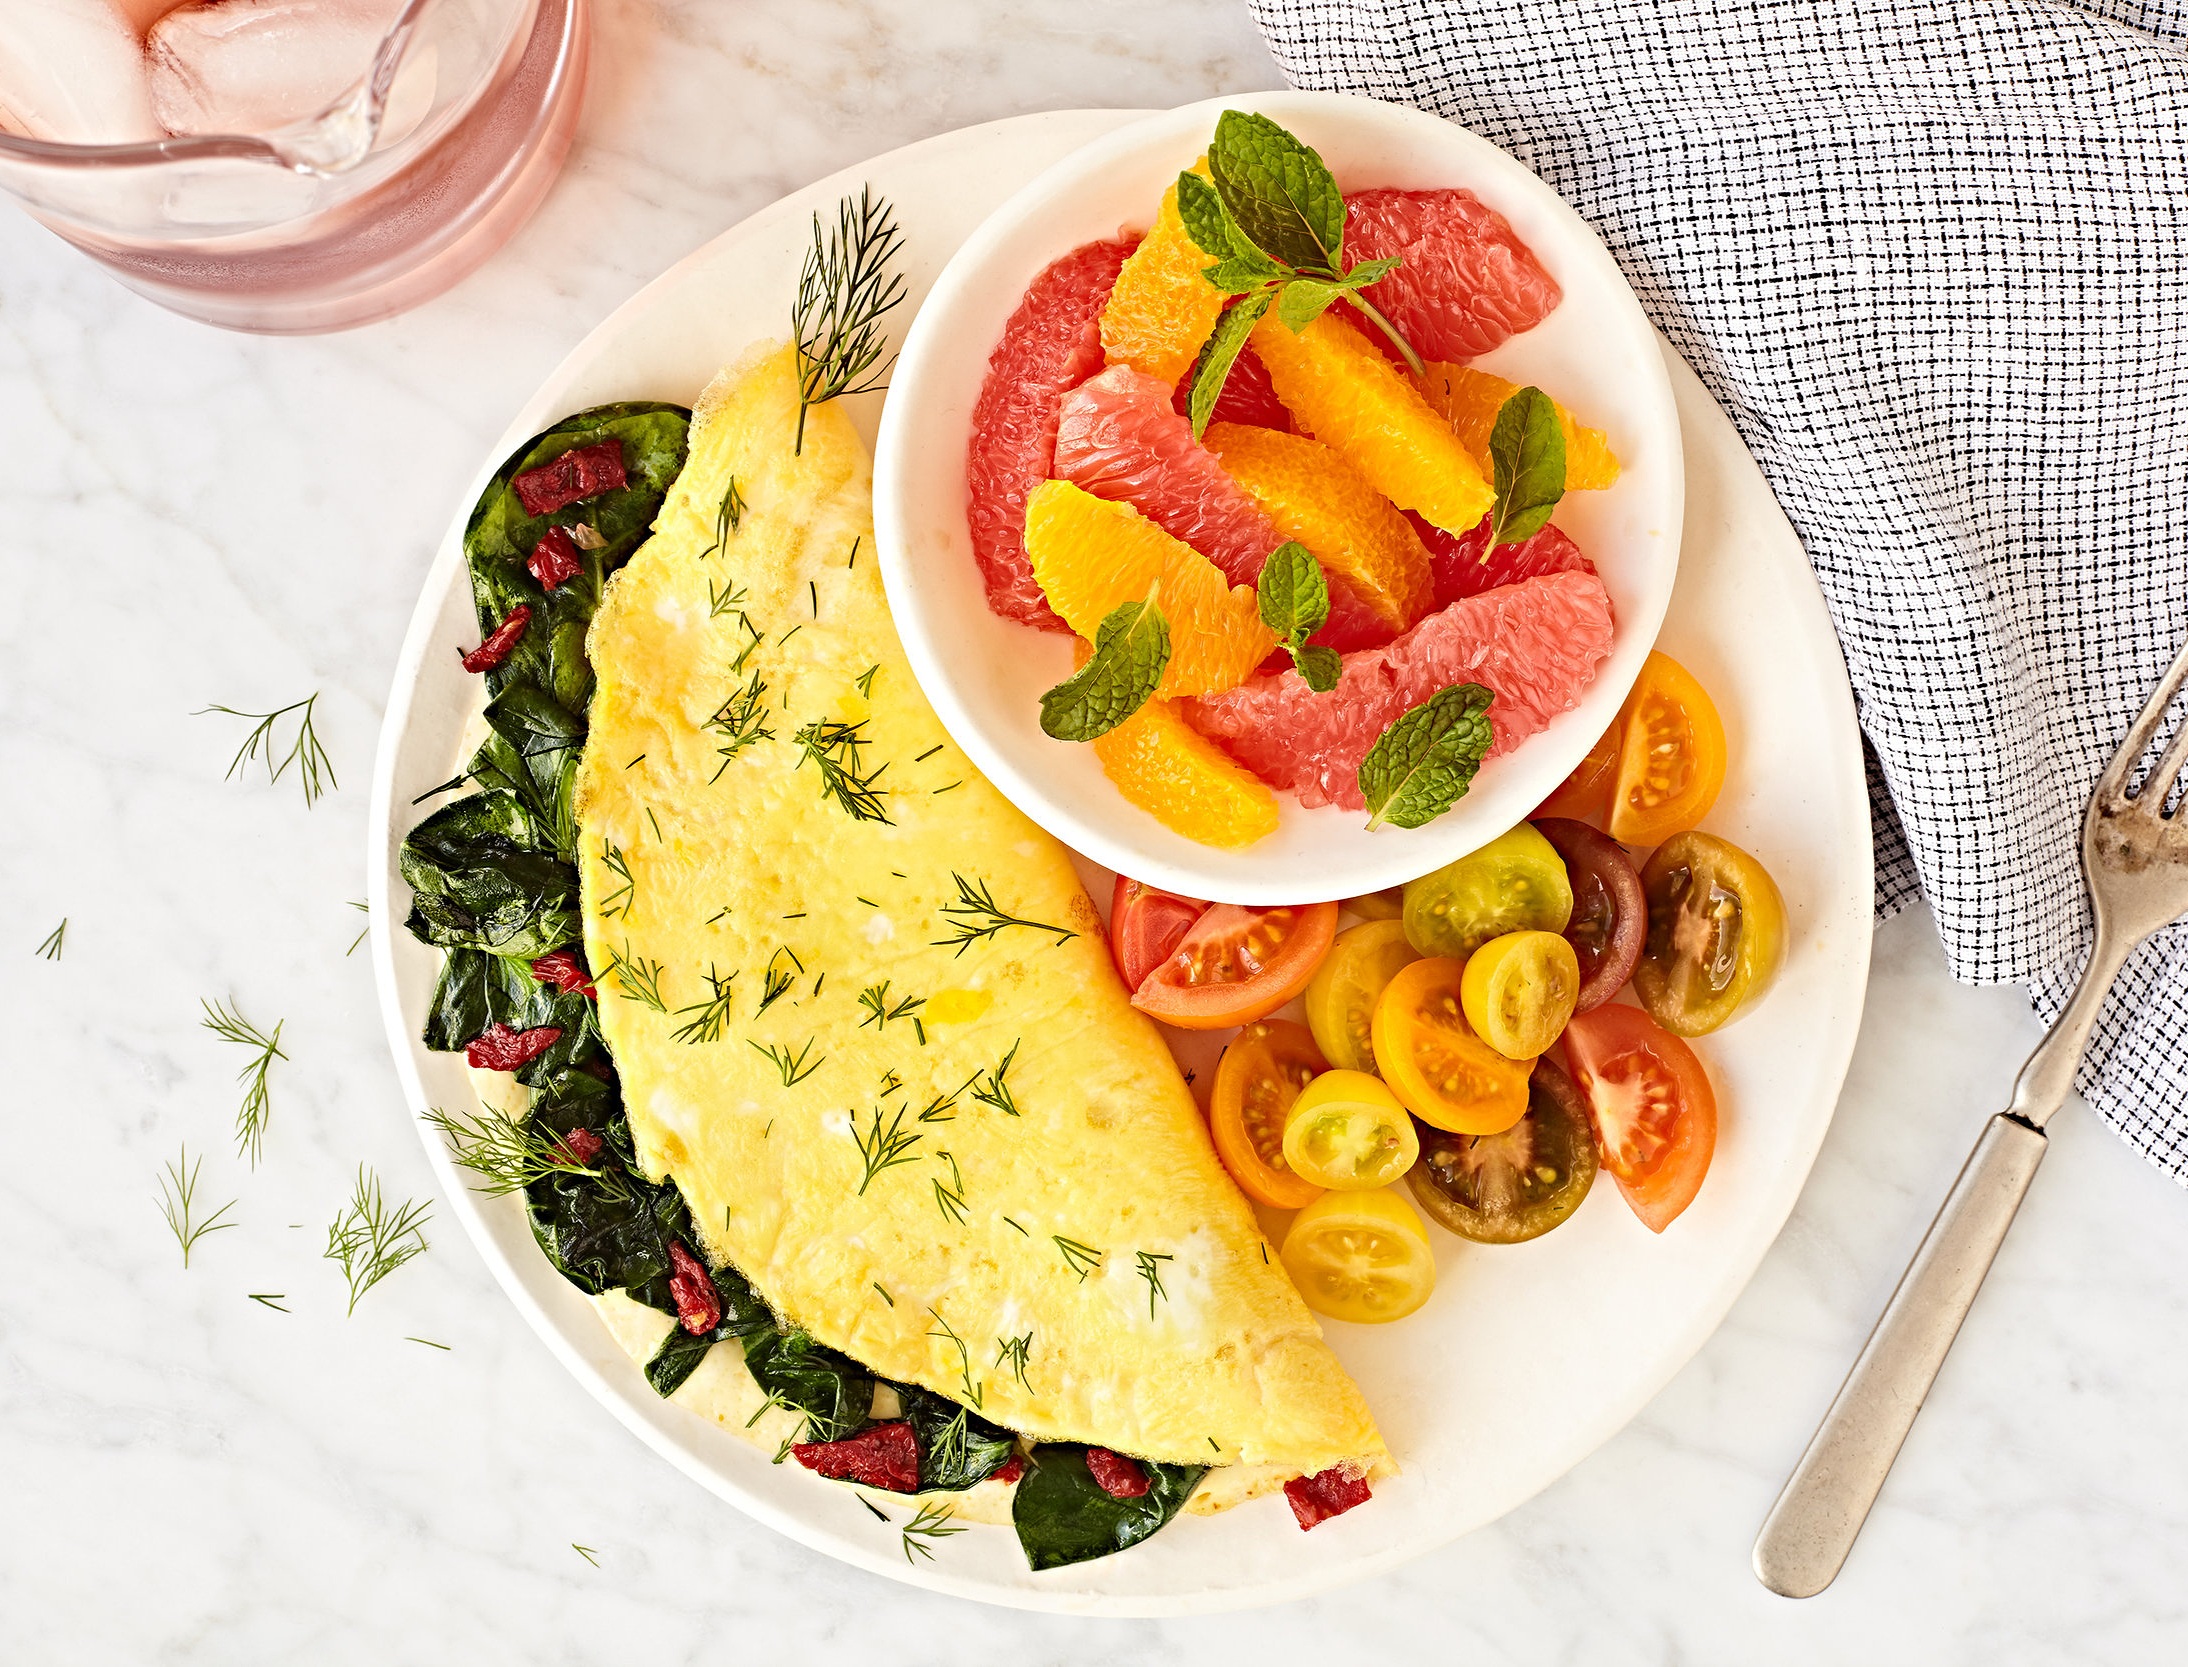 Spinach Omelet / Crystal Cartier - Meal Delivery Food Photographer LA